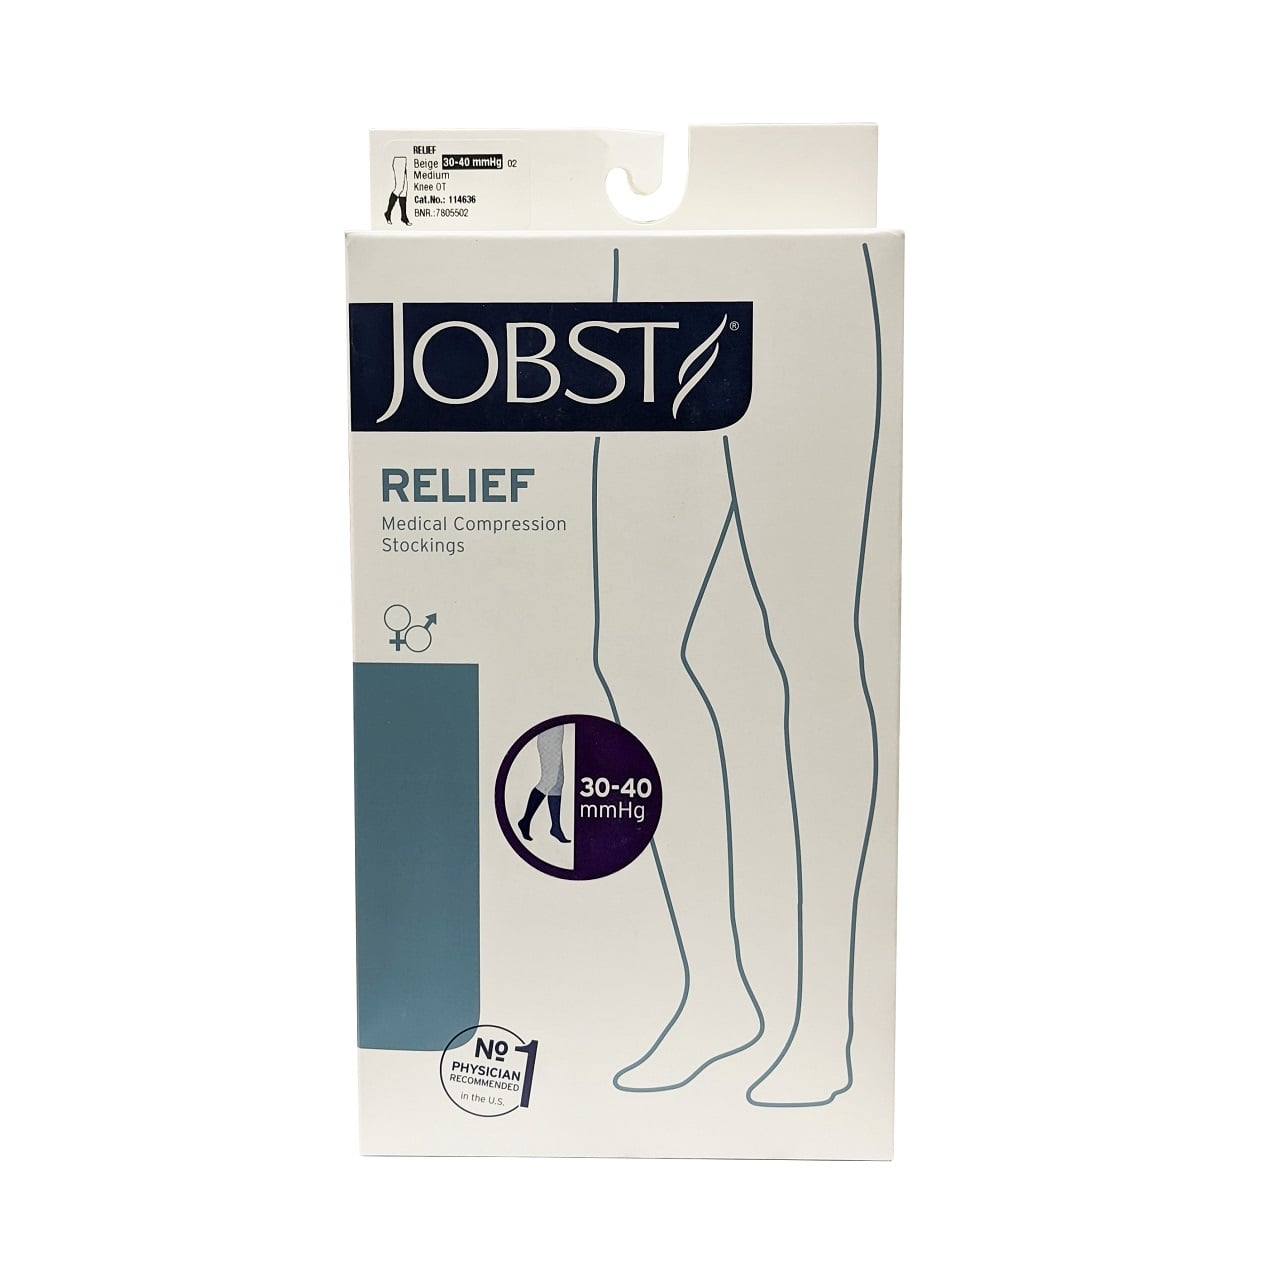 Product label for Jobst Relief Compression Stockings 30-40 mmHg - Knee High / Open Toe / Beige (Medium))